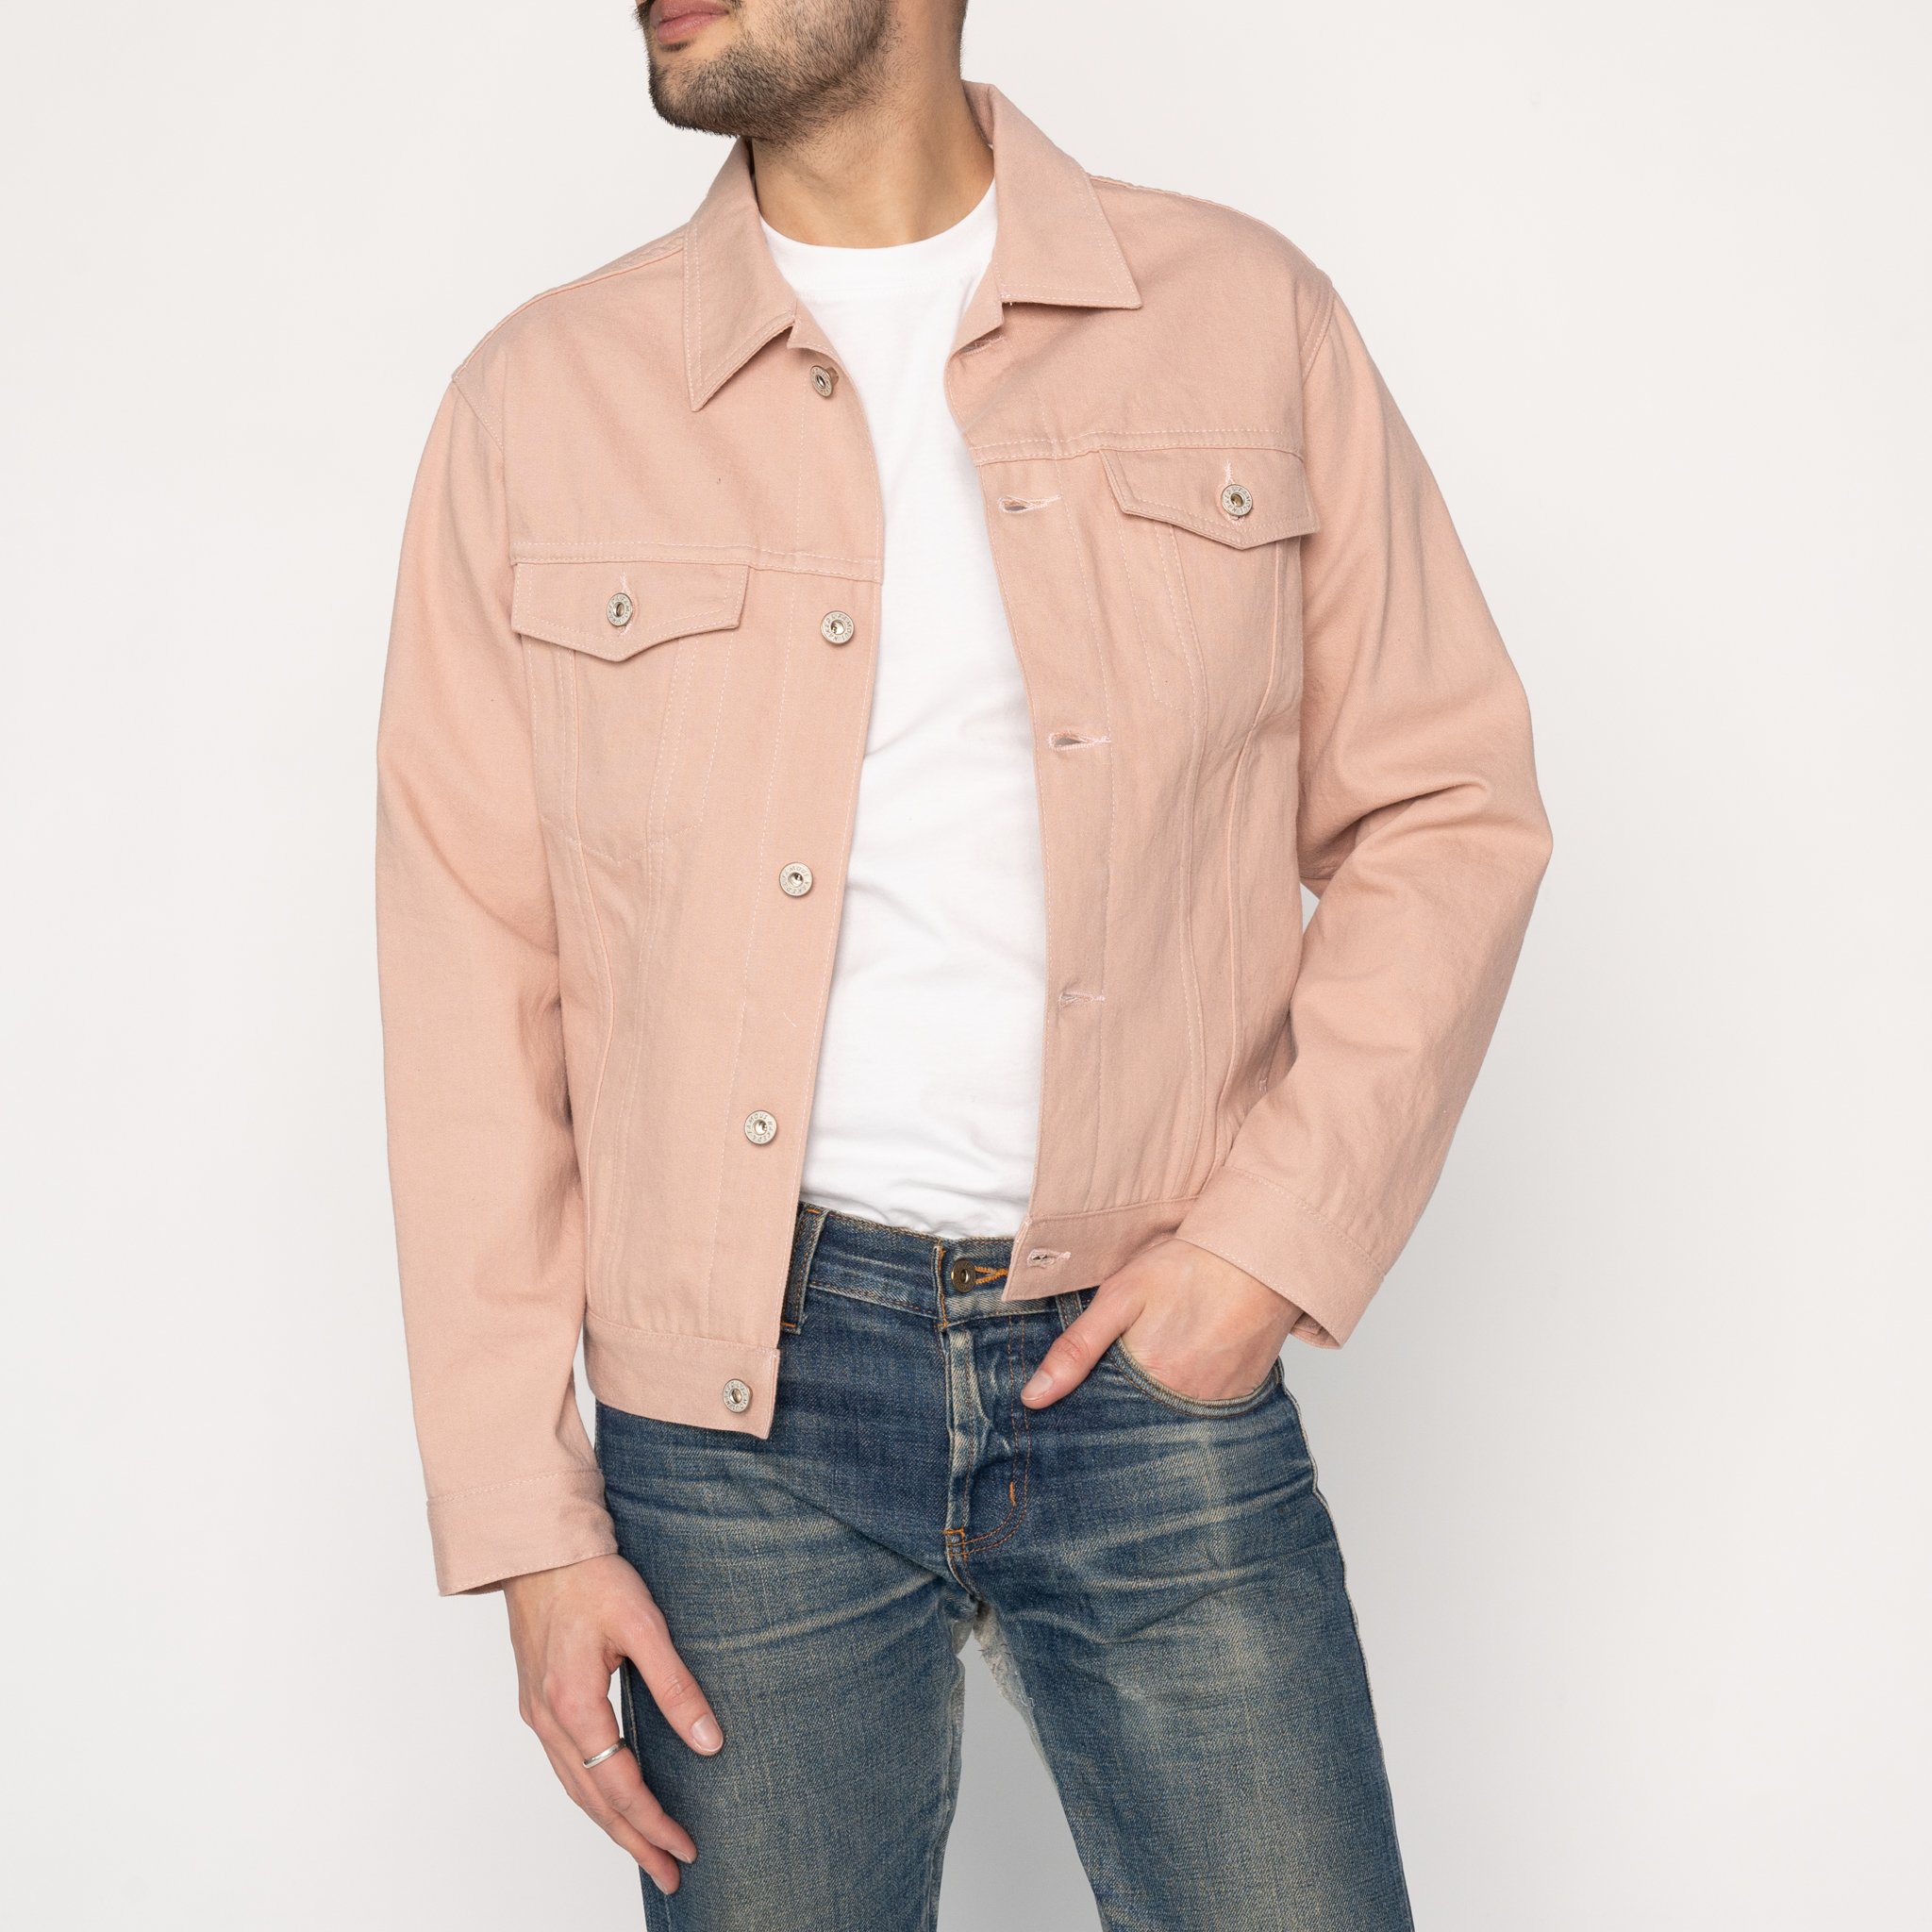 High Quality Stretch Slim Brown Denim Casual Jackets For Men For Men  Spring/Autumn Fashion By A Top Brand 230214 From Buyocean02, $36.94 |  DHgate.Com